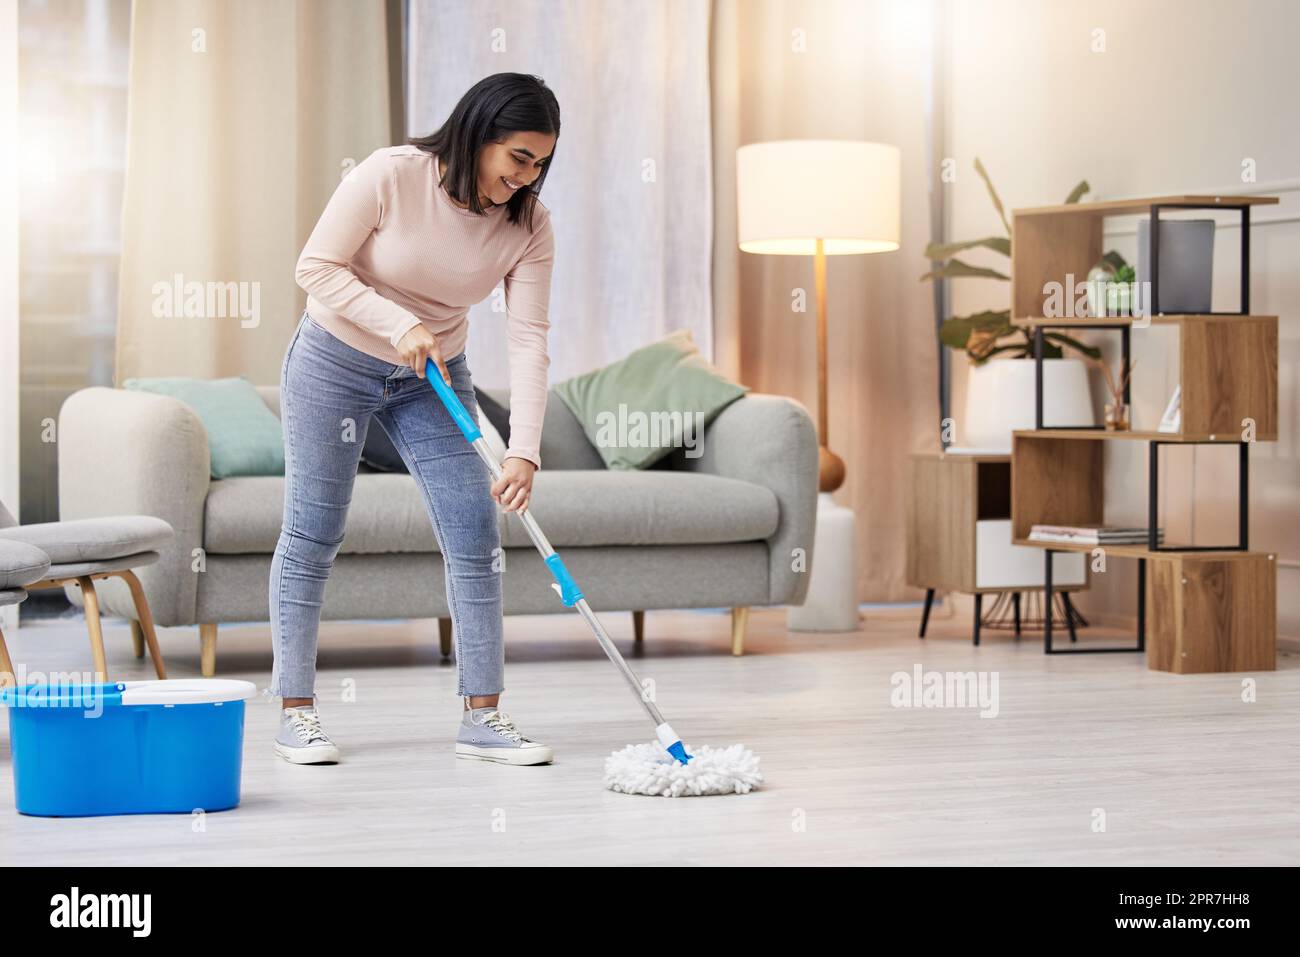 Mop Bucket Cleaning Mopping Floor Laundry Room Home Clean Housework Stock  Photo by ©pratoomrat 499555126